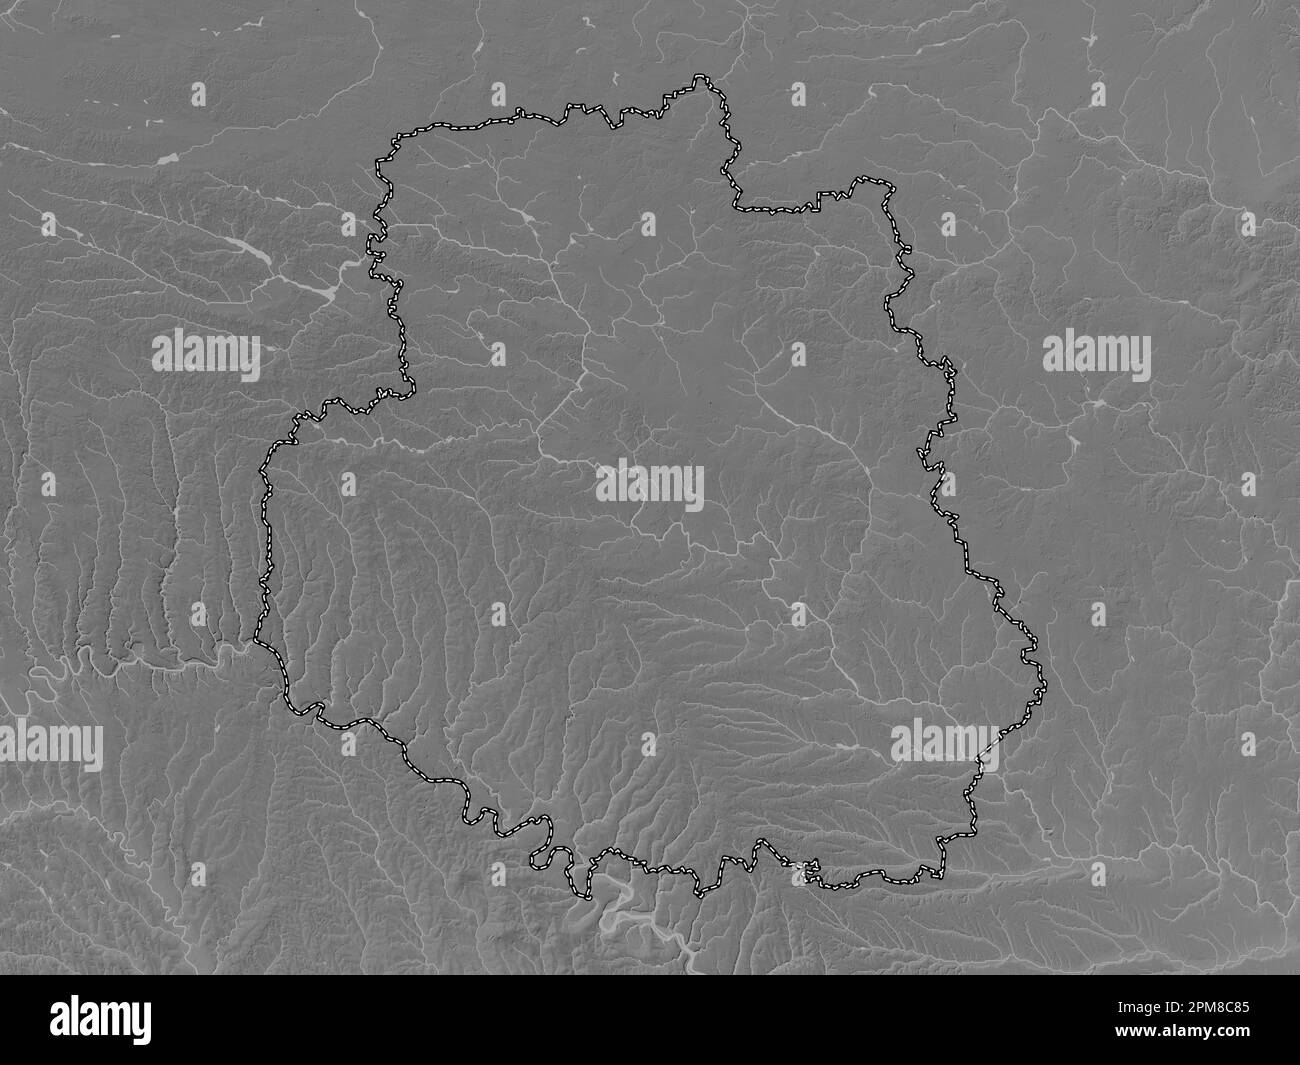 Vinnytsya, region of Ukraine. Grayscale elevation map with lakes and rivers Stock Photo